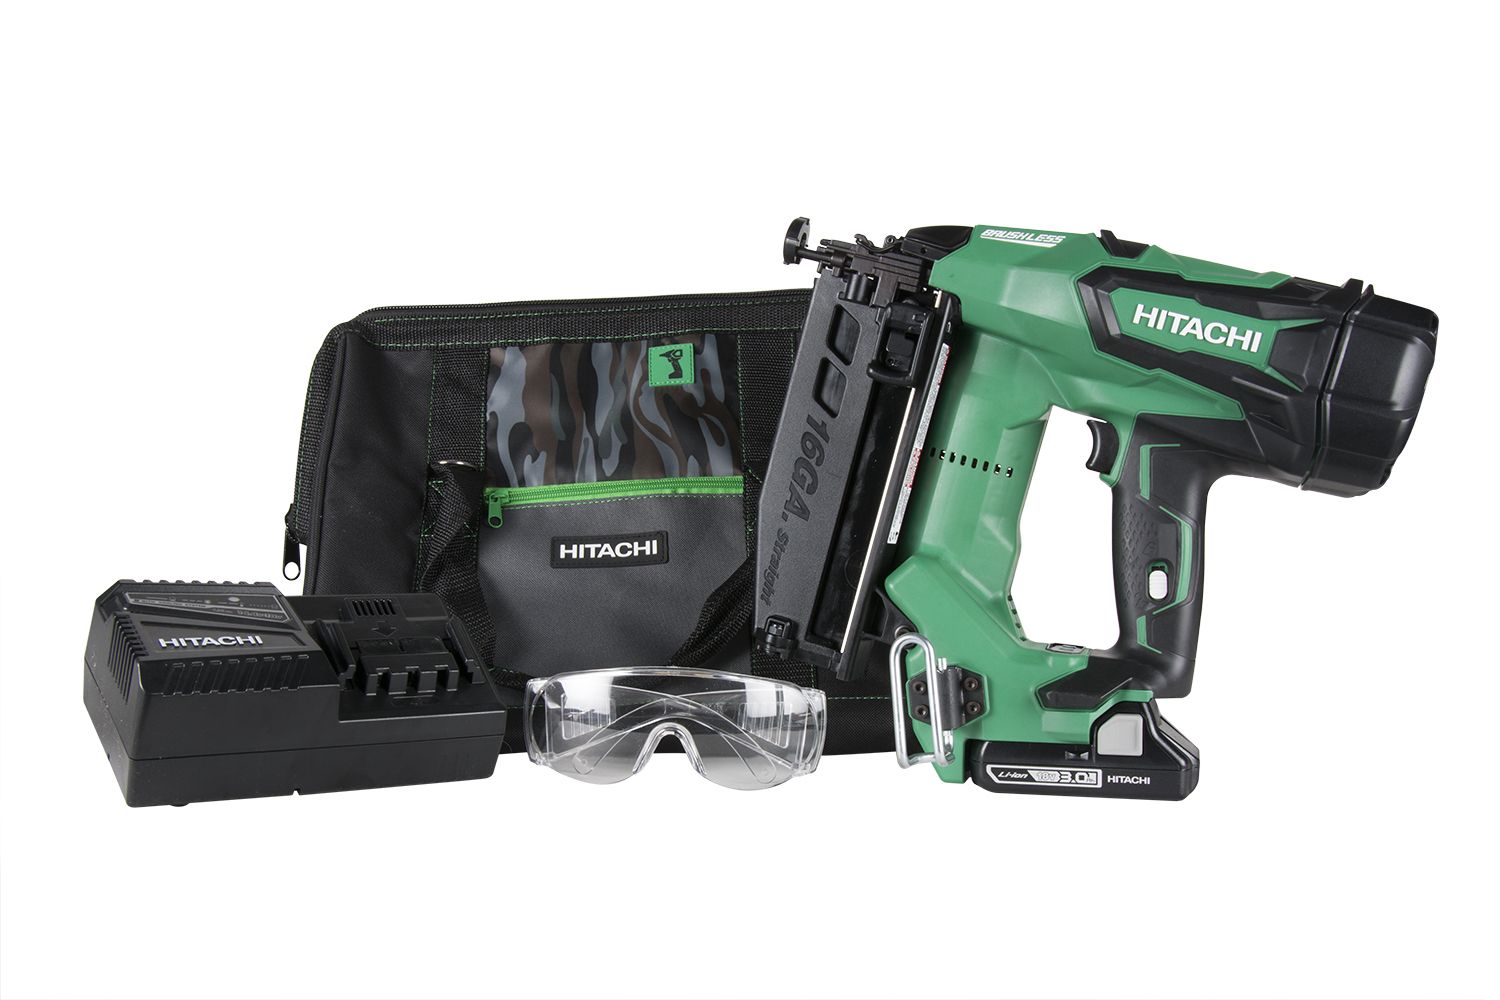 Hitachi Power Tools recently announced the newest additions to its Finish Nailer lineup with a New Series of Battery Powered Cordless Brushless models;